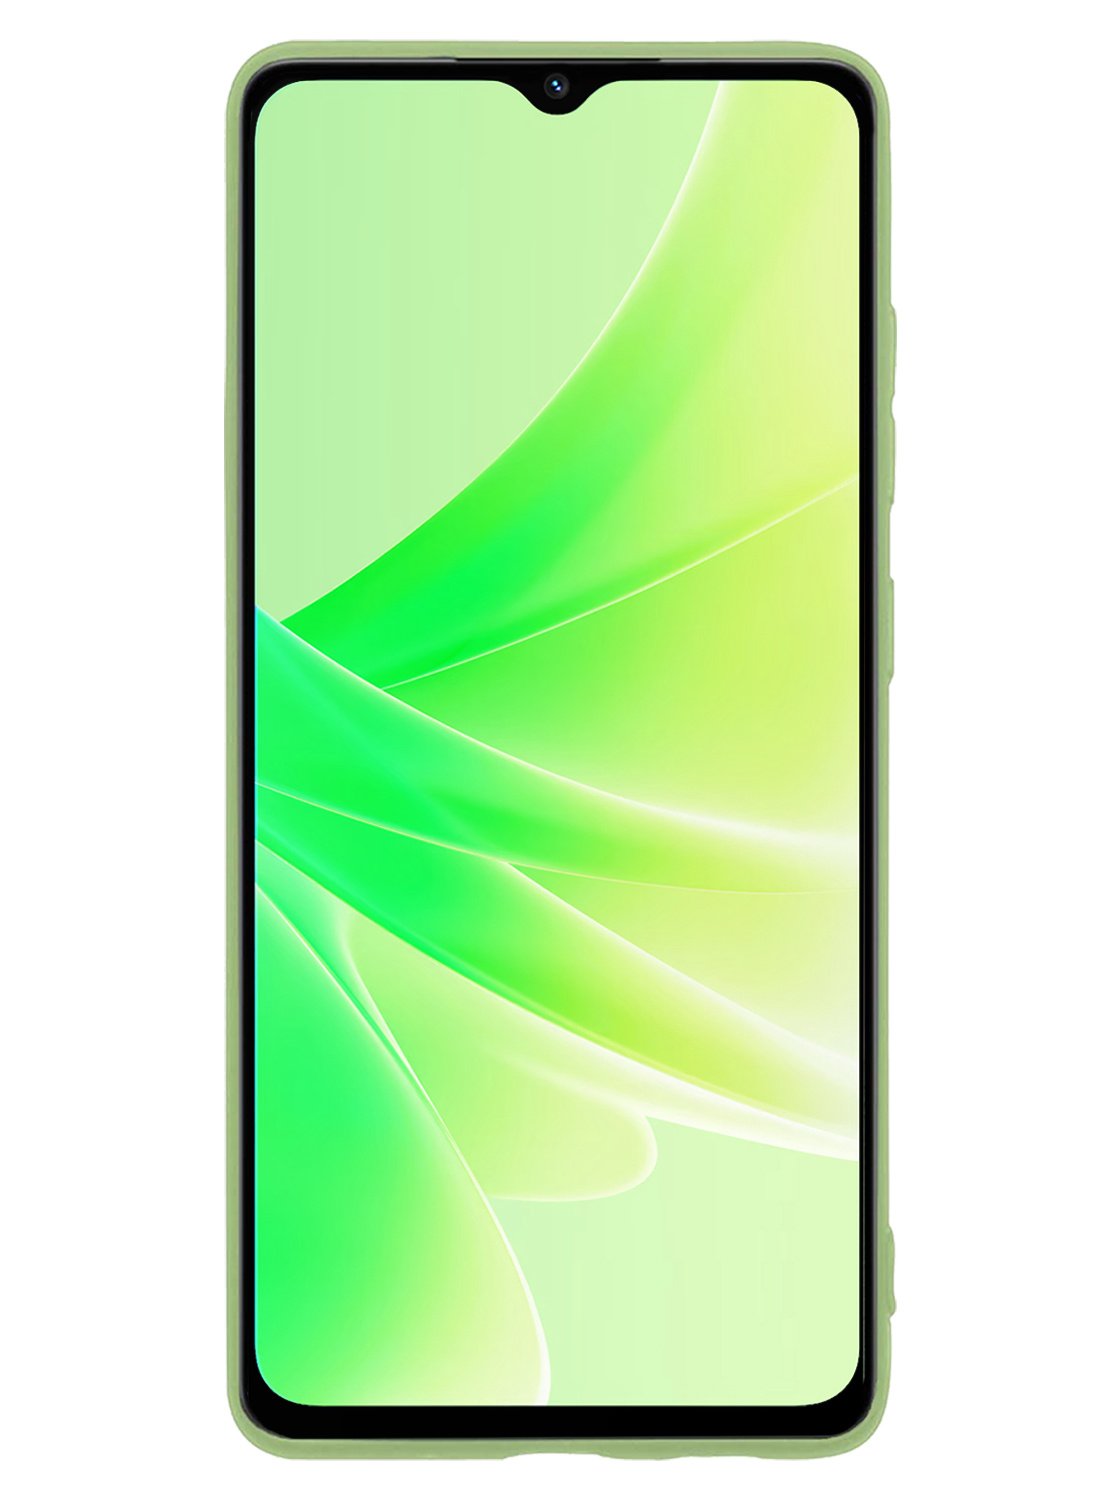 Nomfy OPPO A17 Hoesje Siliconen Case Back Cover - OPPO A17 Hoes Cover Silicone - Groen - 2X